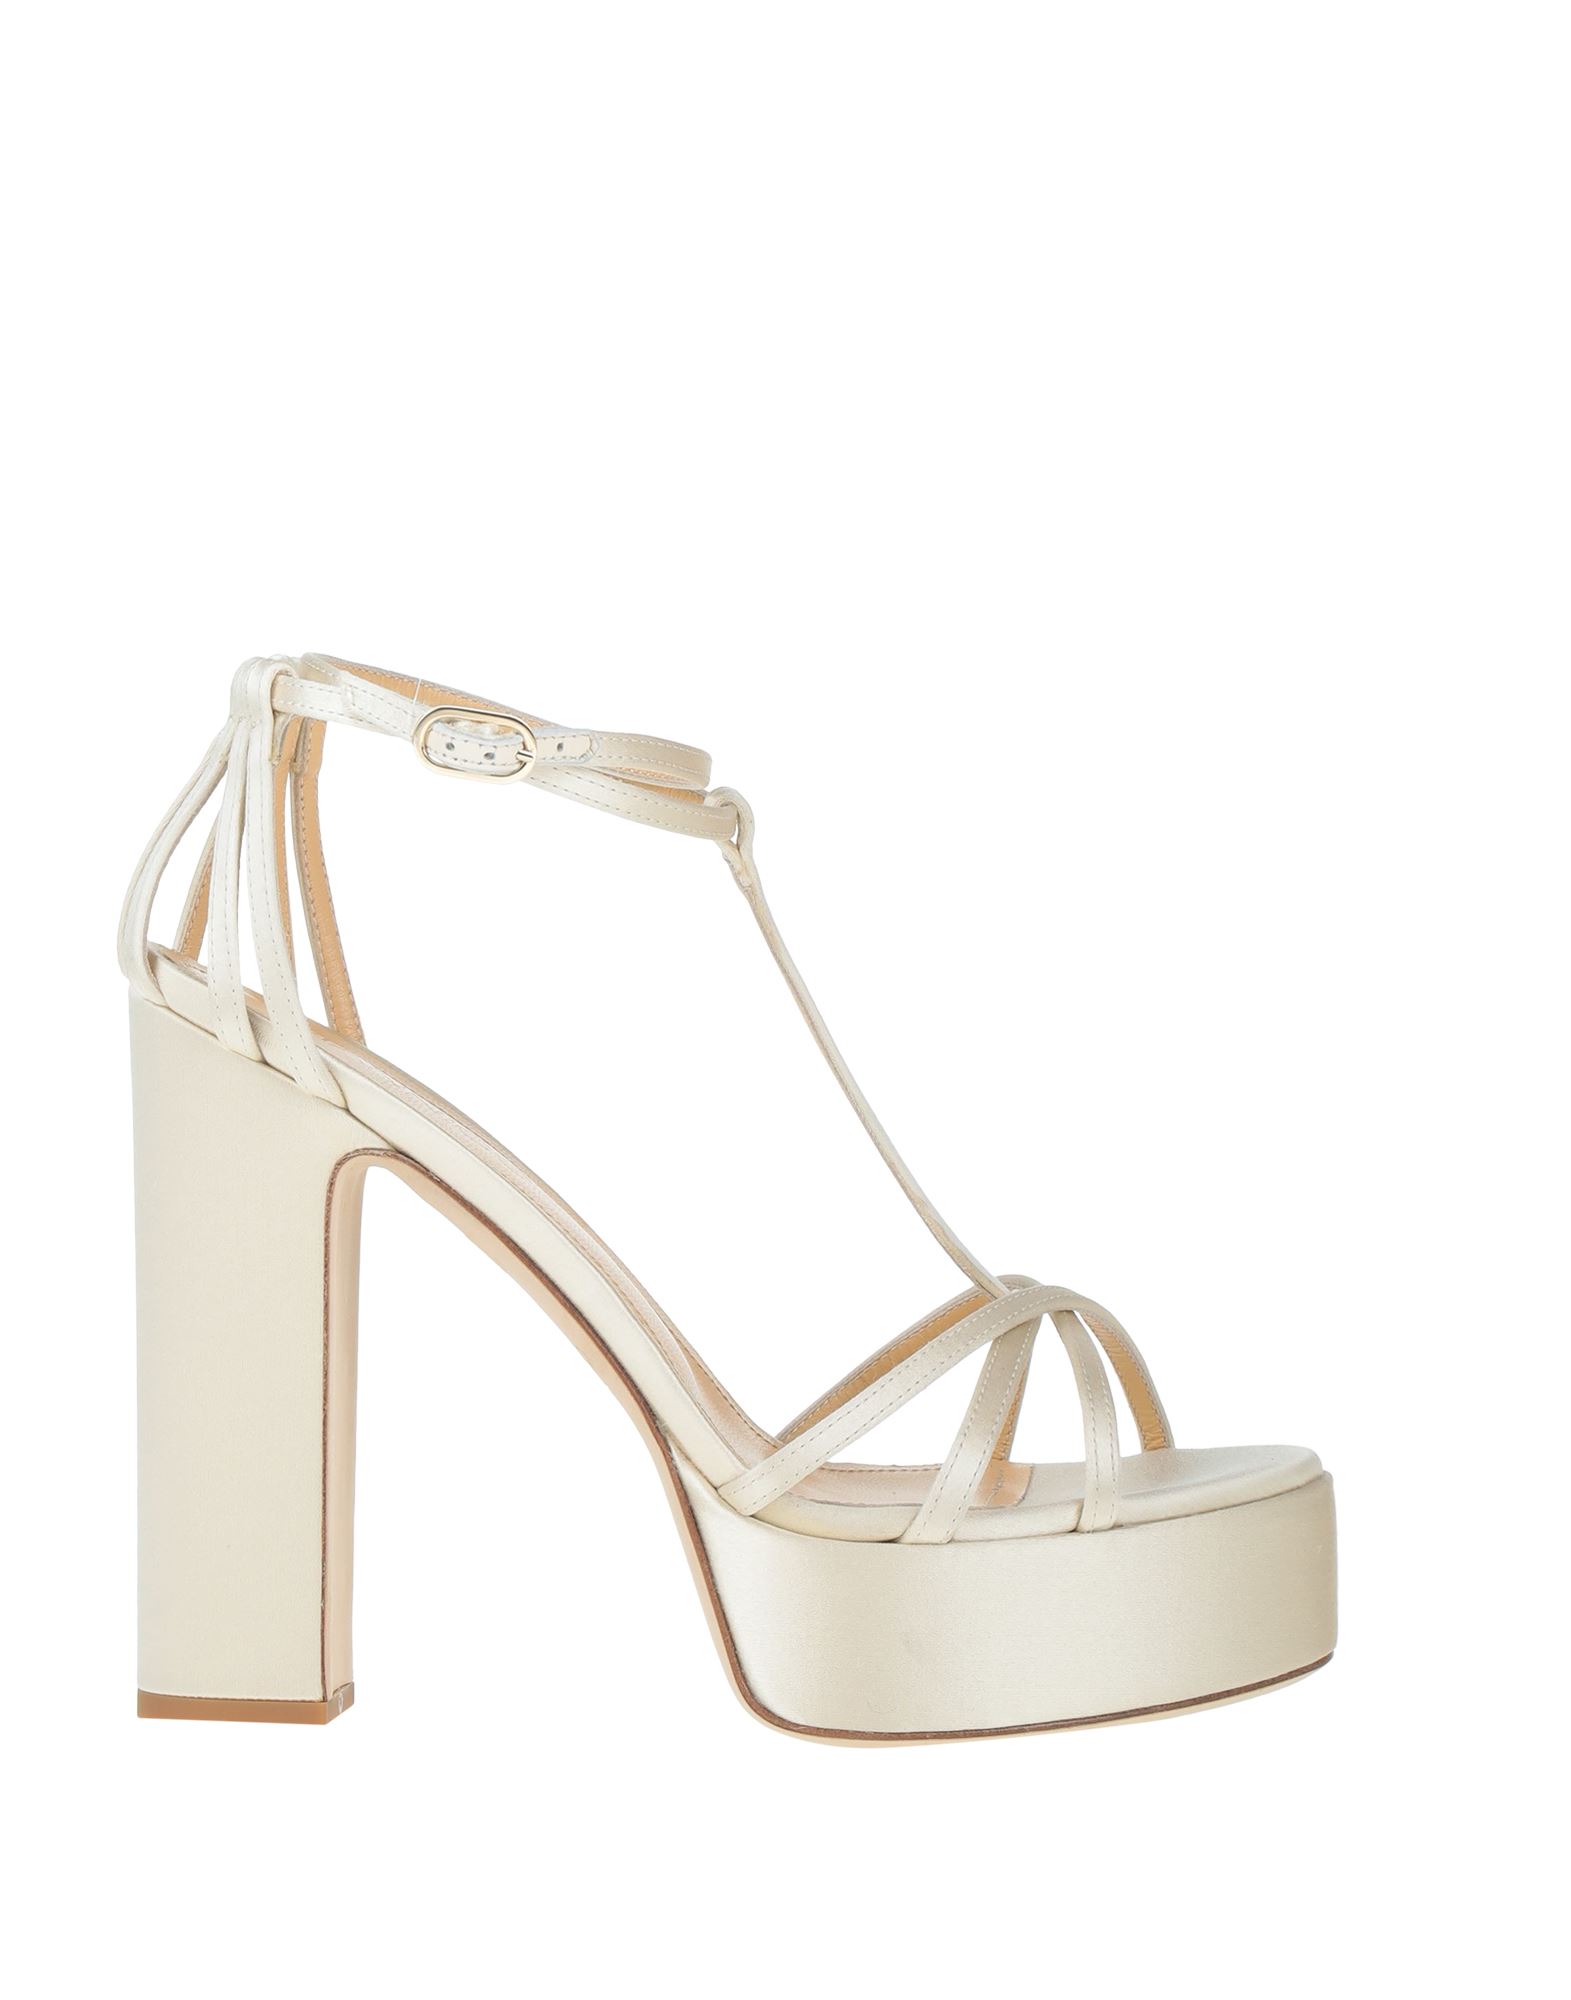 Giannico Sandals In Ivory